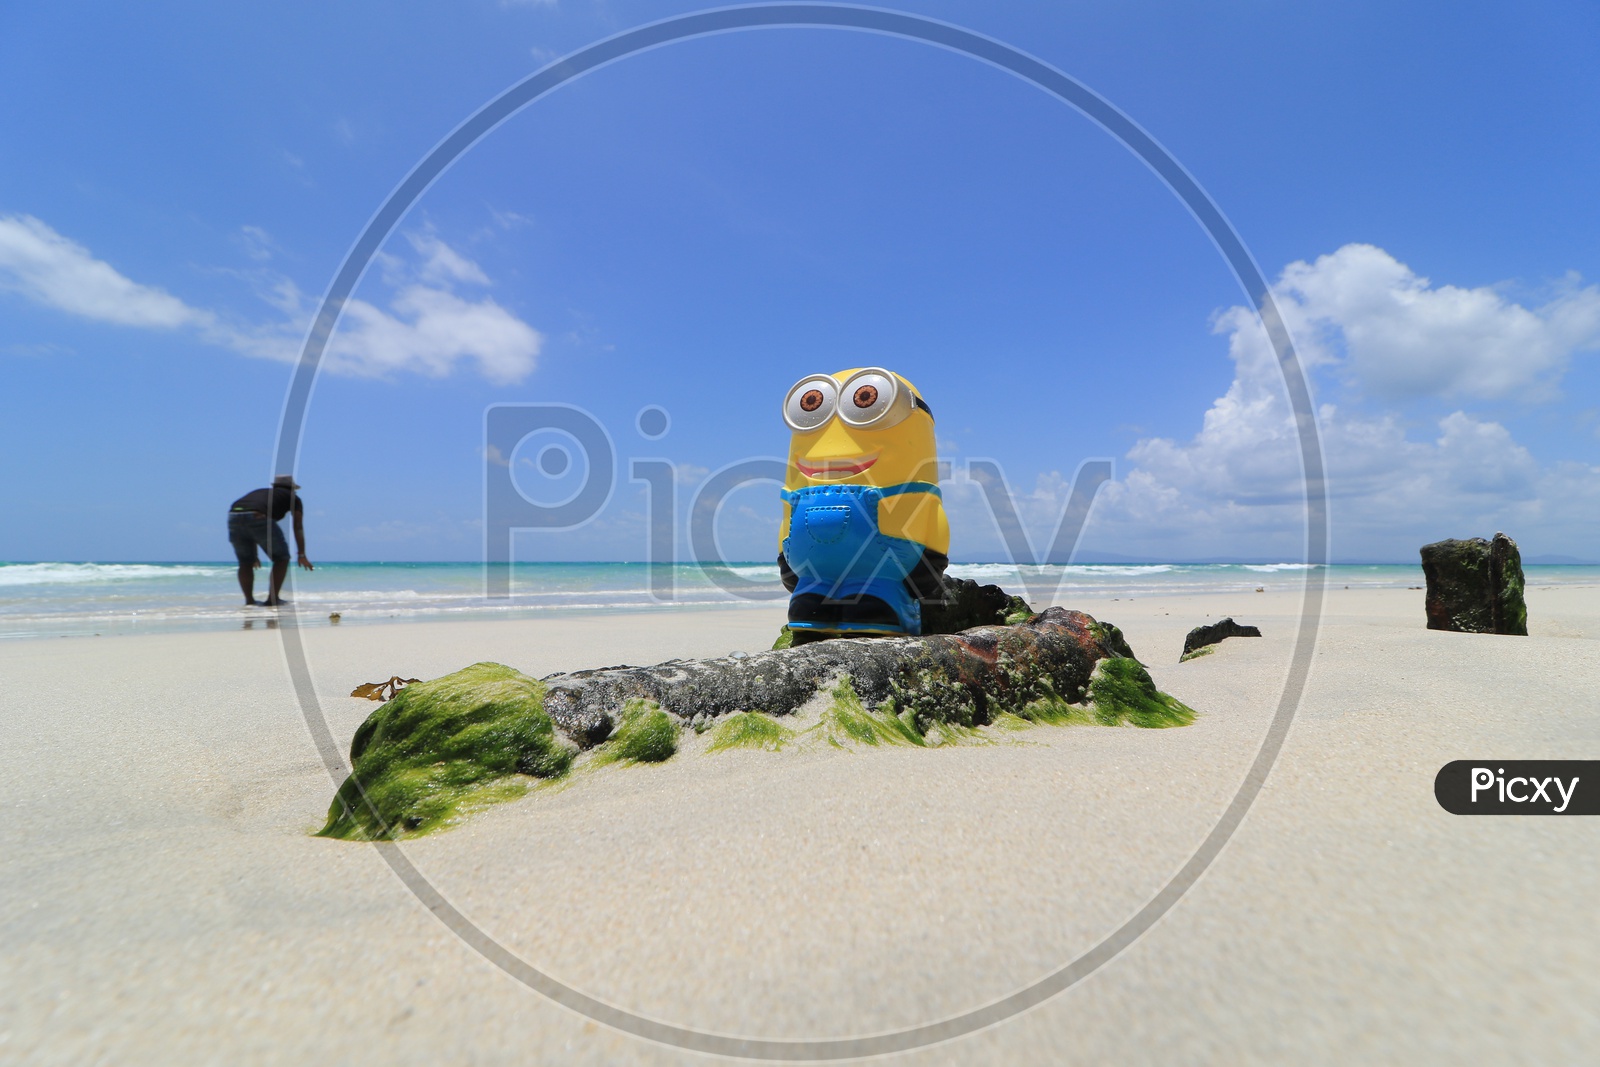 Minion Toy in the beach